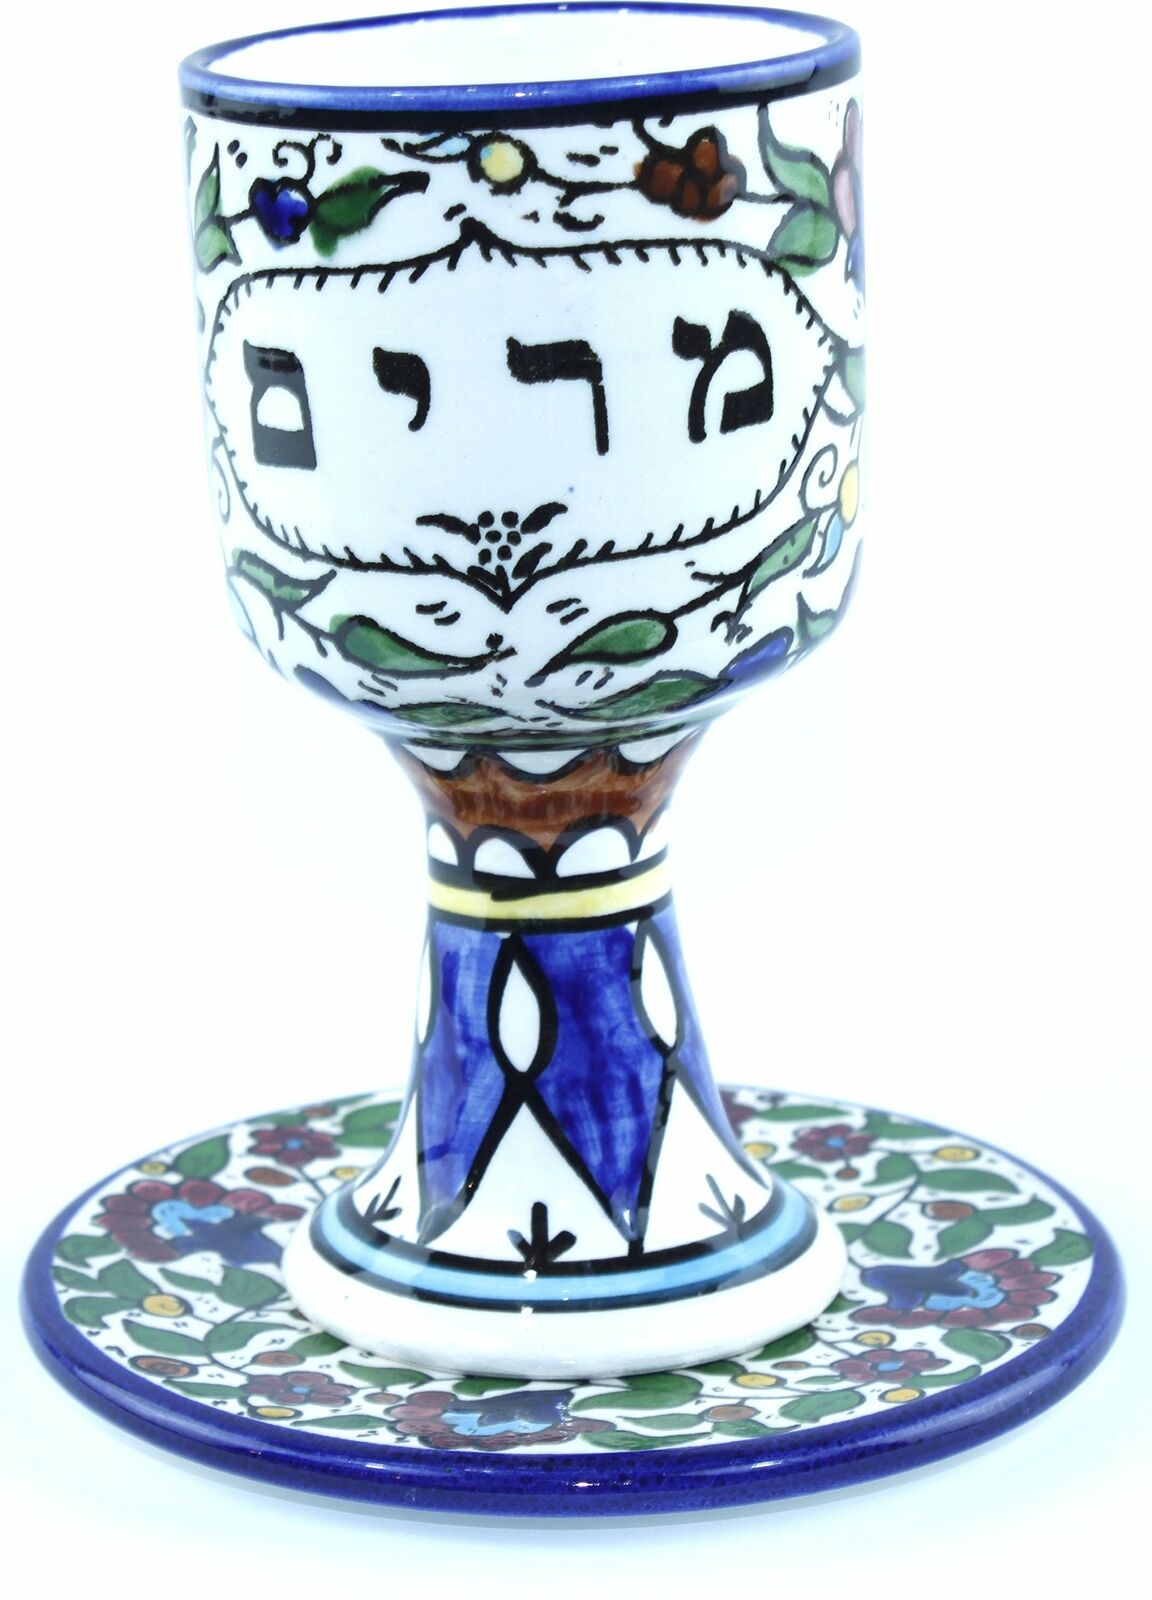 Miriam Seder Kiddush Ceramic Passover Cup or goblet and plate - 6 Inches